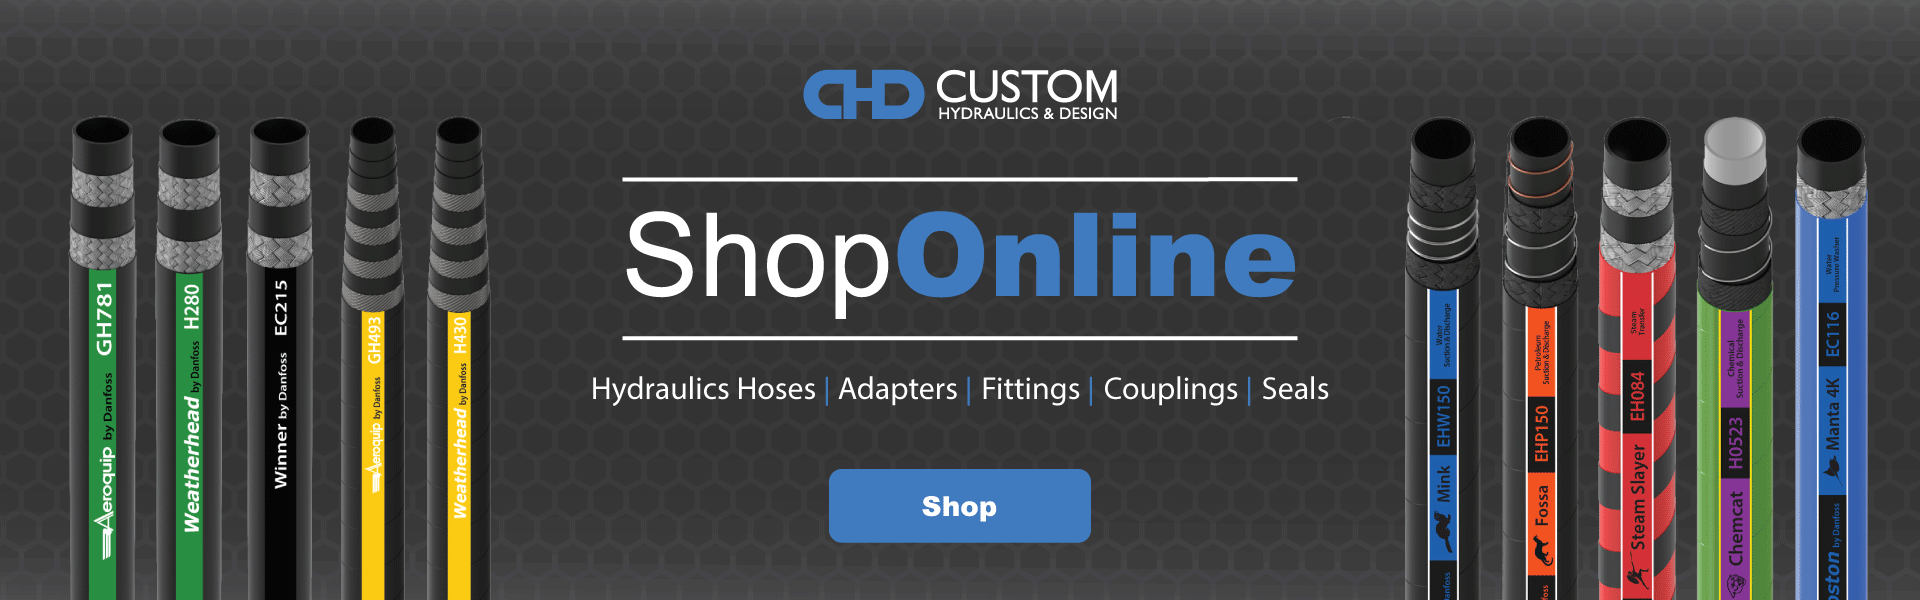 hydraulic hose online shop, aeroquip hoses, adapters, fittings, couplings, seals